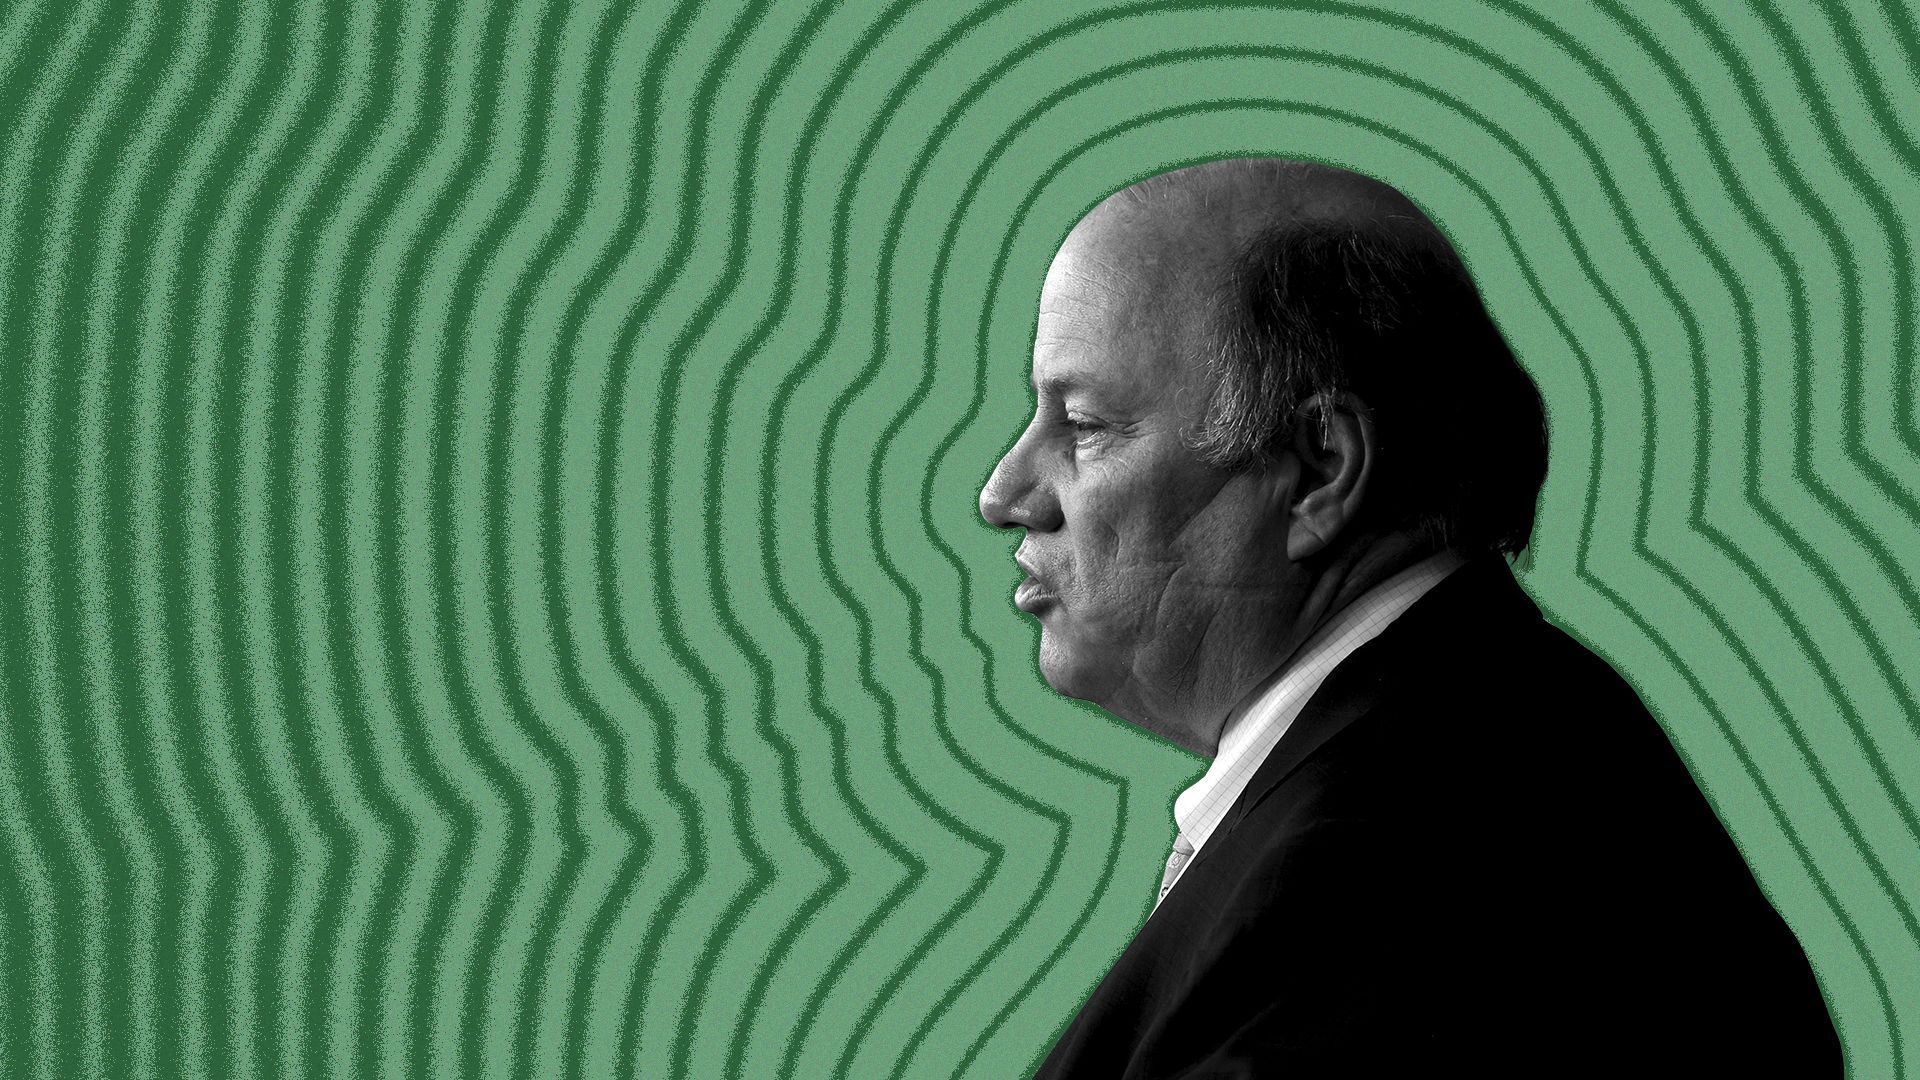 Illustrator of Detroit Mayor, Mike Duggan, with lines radiating from around him.